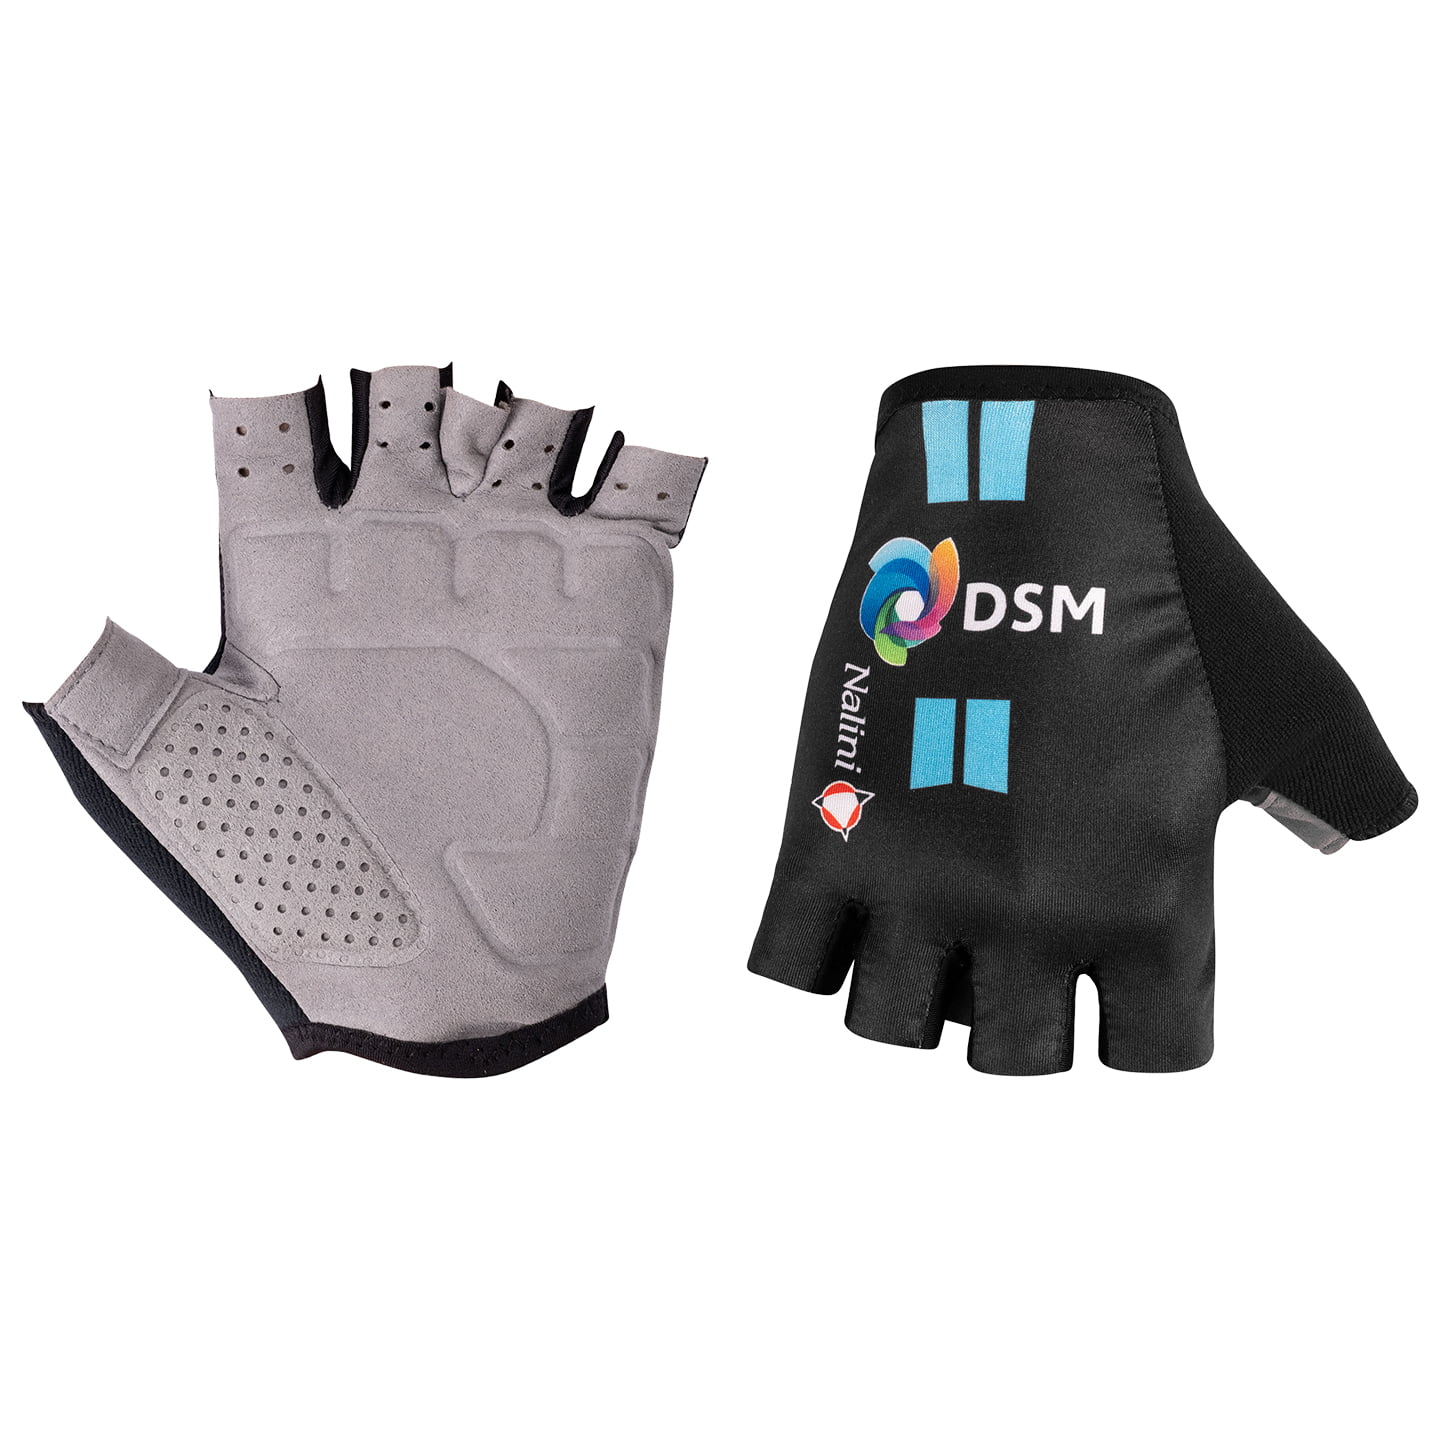 TEAM DSM 2022 Cycling Gloves, for men, size 2XL, Cycling gloves, Cycle clothing